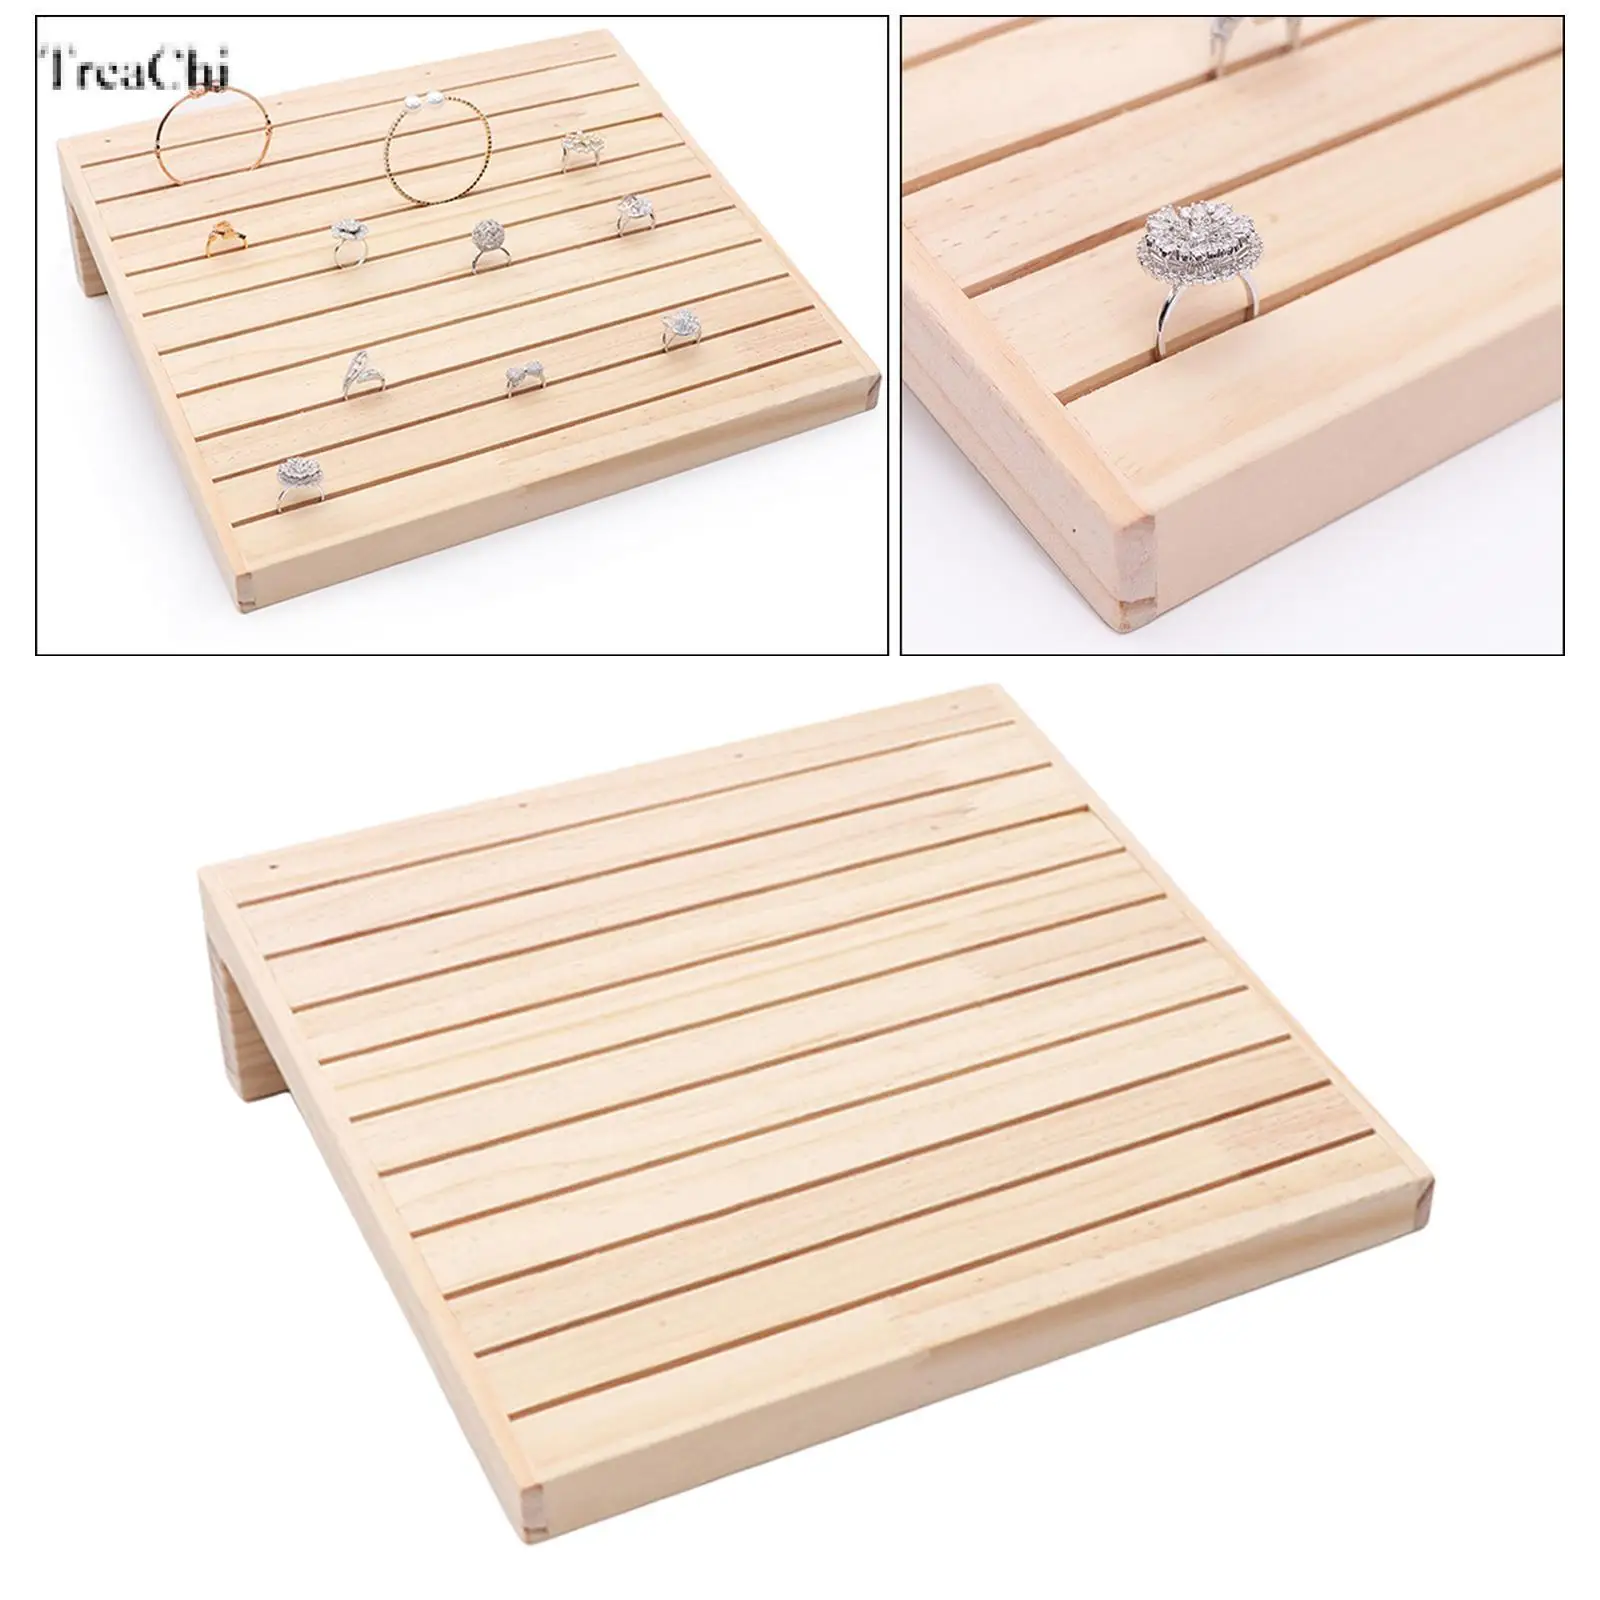 Wooden 10 Rows Ring Display Stand Rings Earrings Selling Earrings Trays Tabletop Home Organizing Rings Holder Jewelry Rack 9pcs practical assembly home organizer rings bracelets display jewelry storage hooks wall mount stand necklaces holder